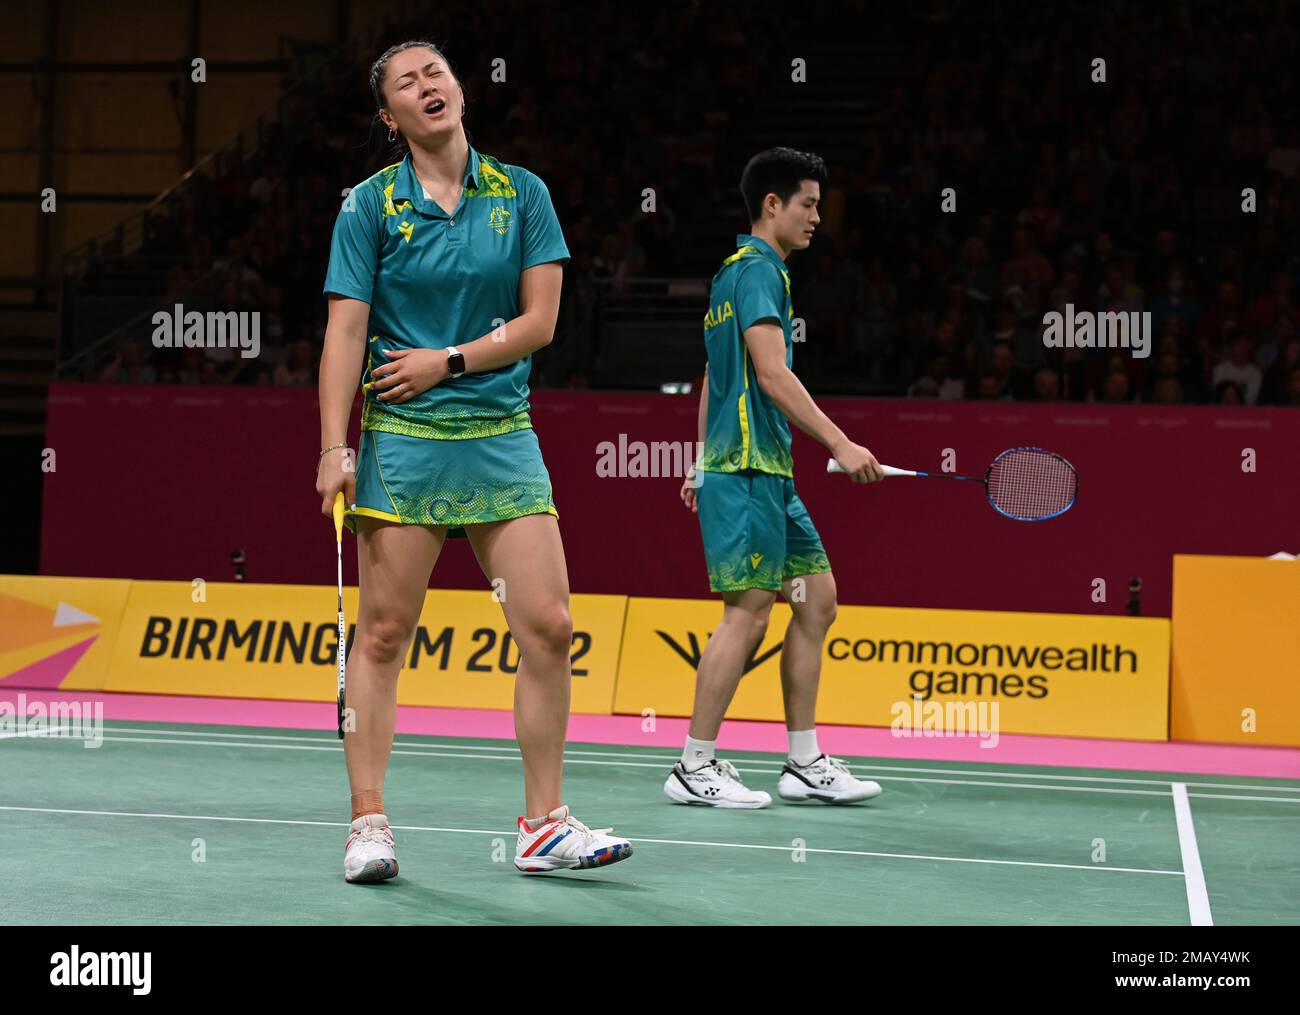 Australias Ying Xiang Lin and Gronya Somerville react during the Badminton Mixed Doubles game against Malaysias Meng Kian Tan and Jing Pel Lai at the Commonwealth Games in Birmingham, England, Friday, Aug.